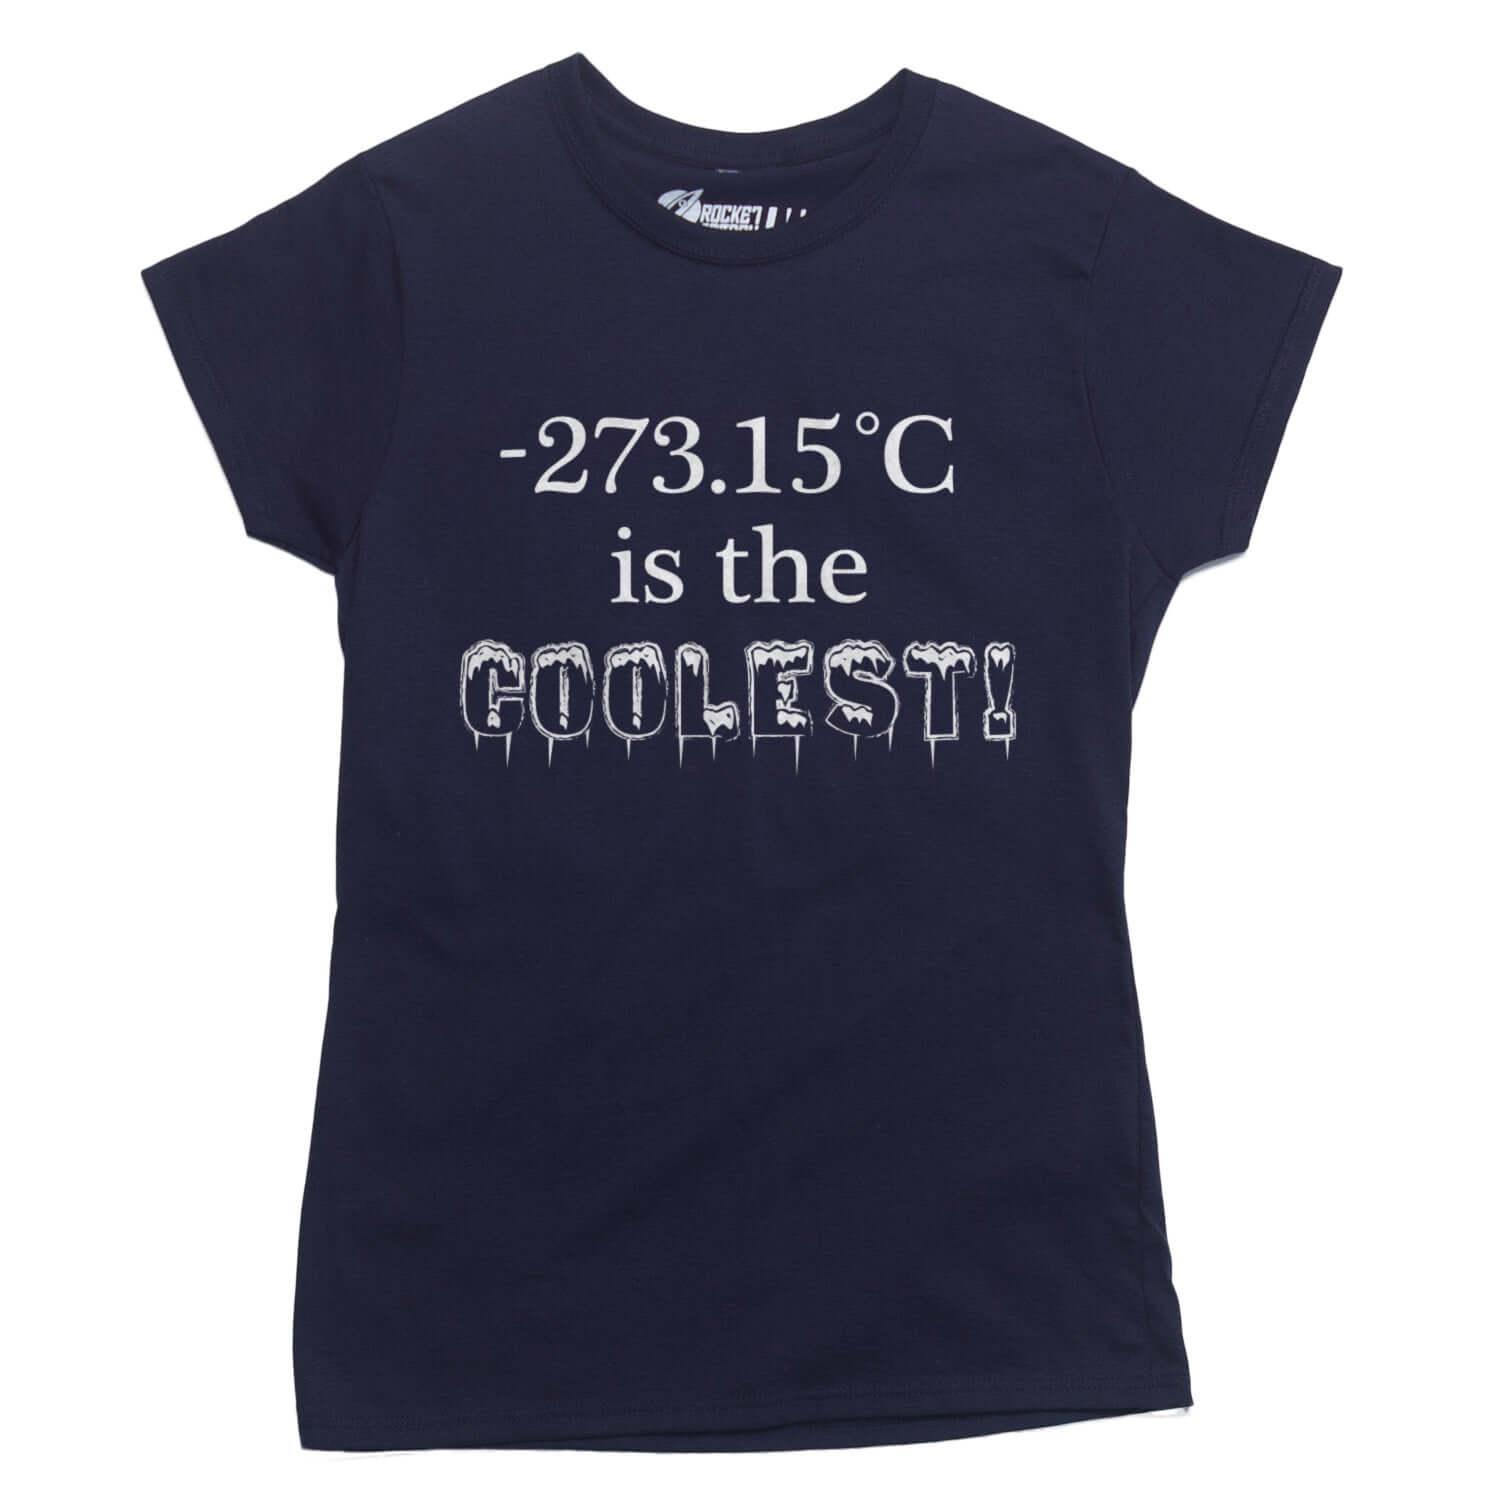 Absolute Zero is the Coolest T-shirt - Rocket Factory Apparel